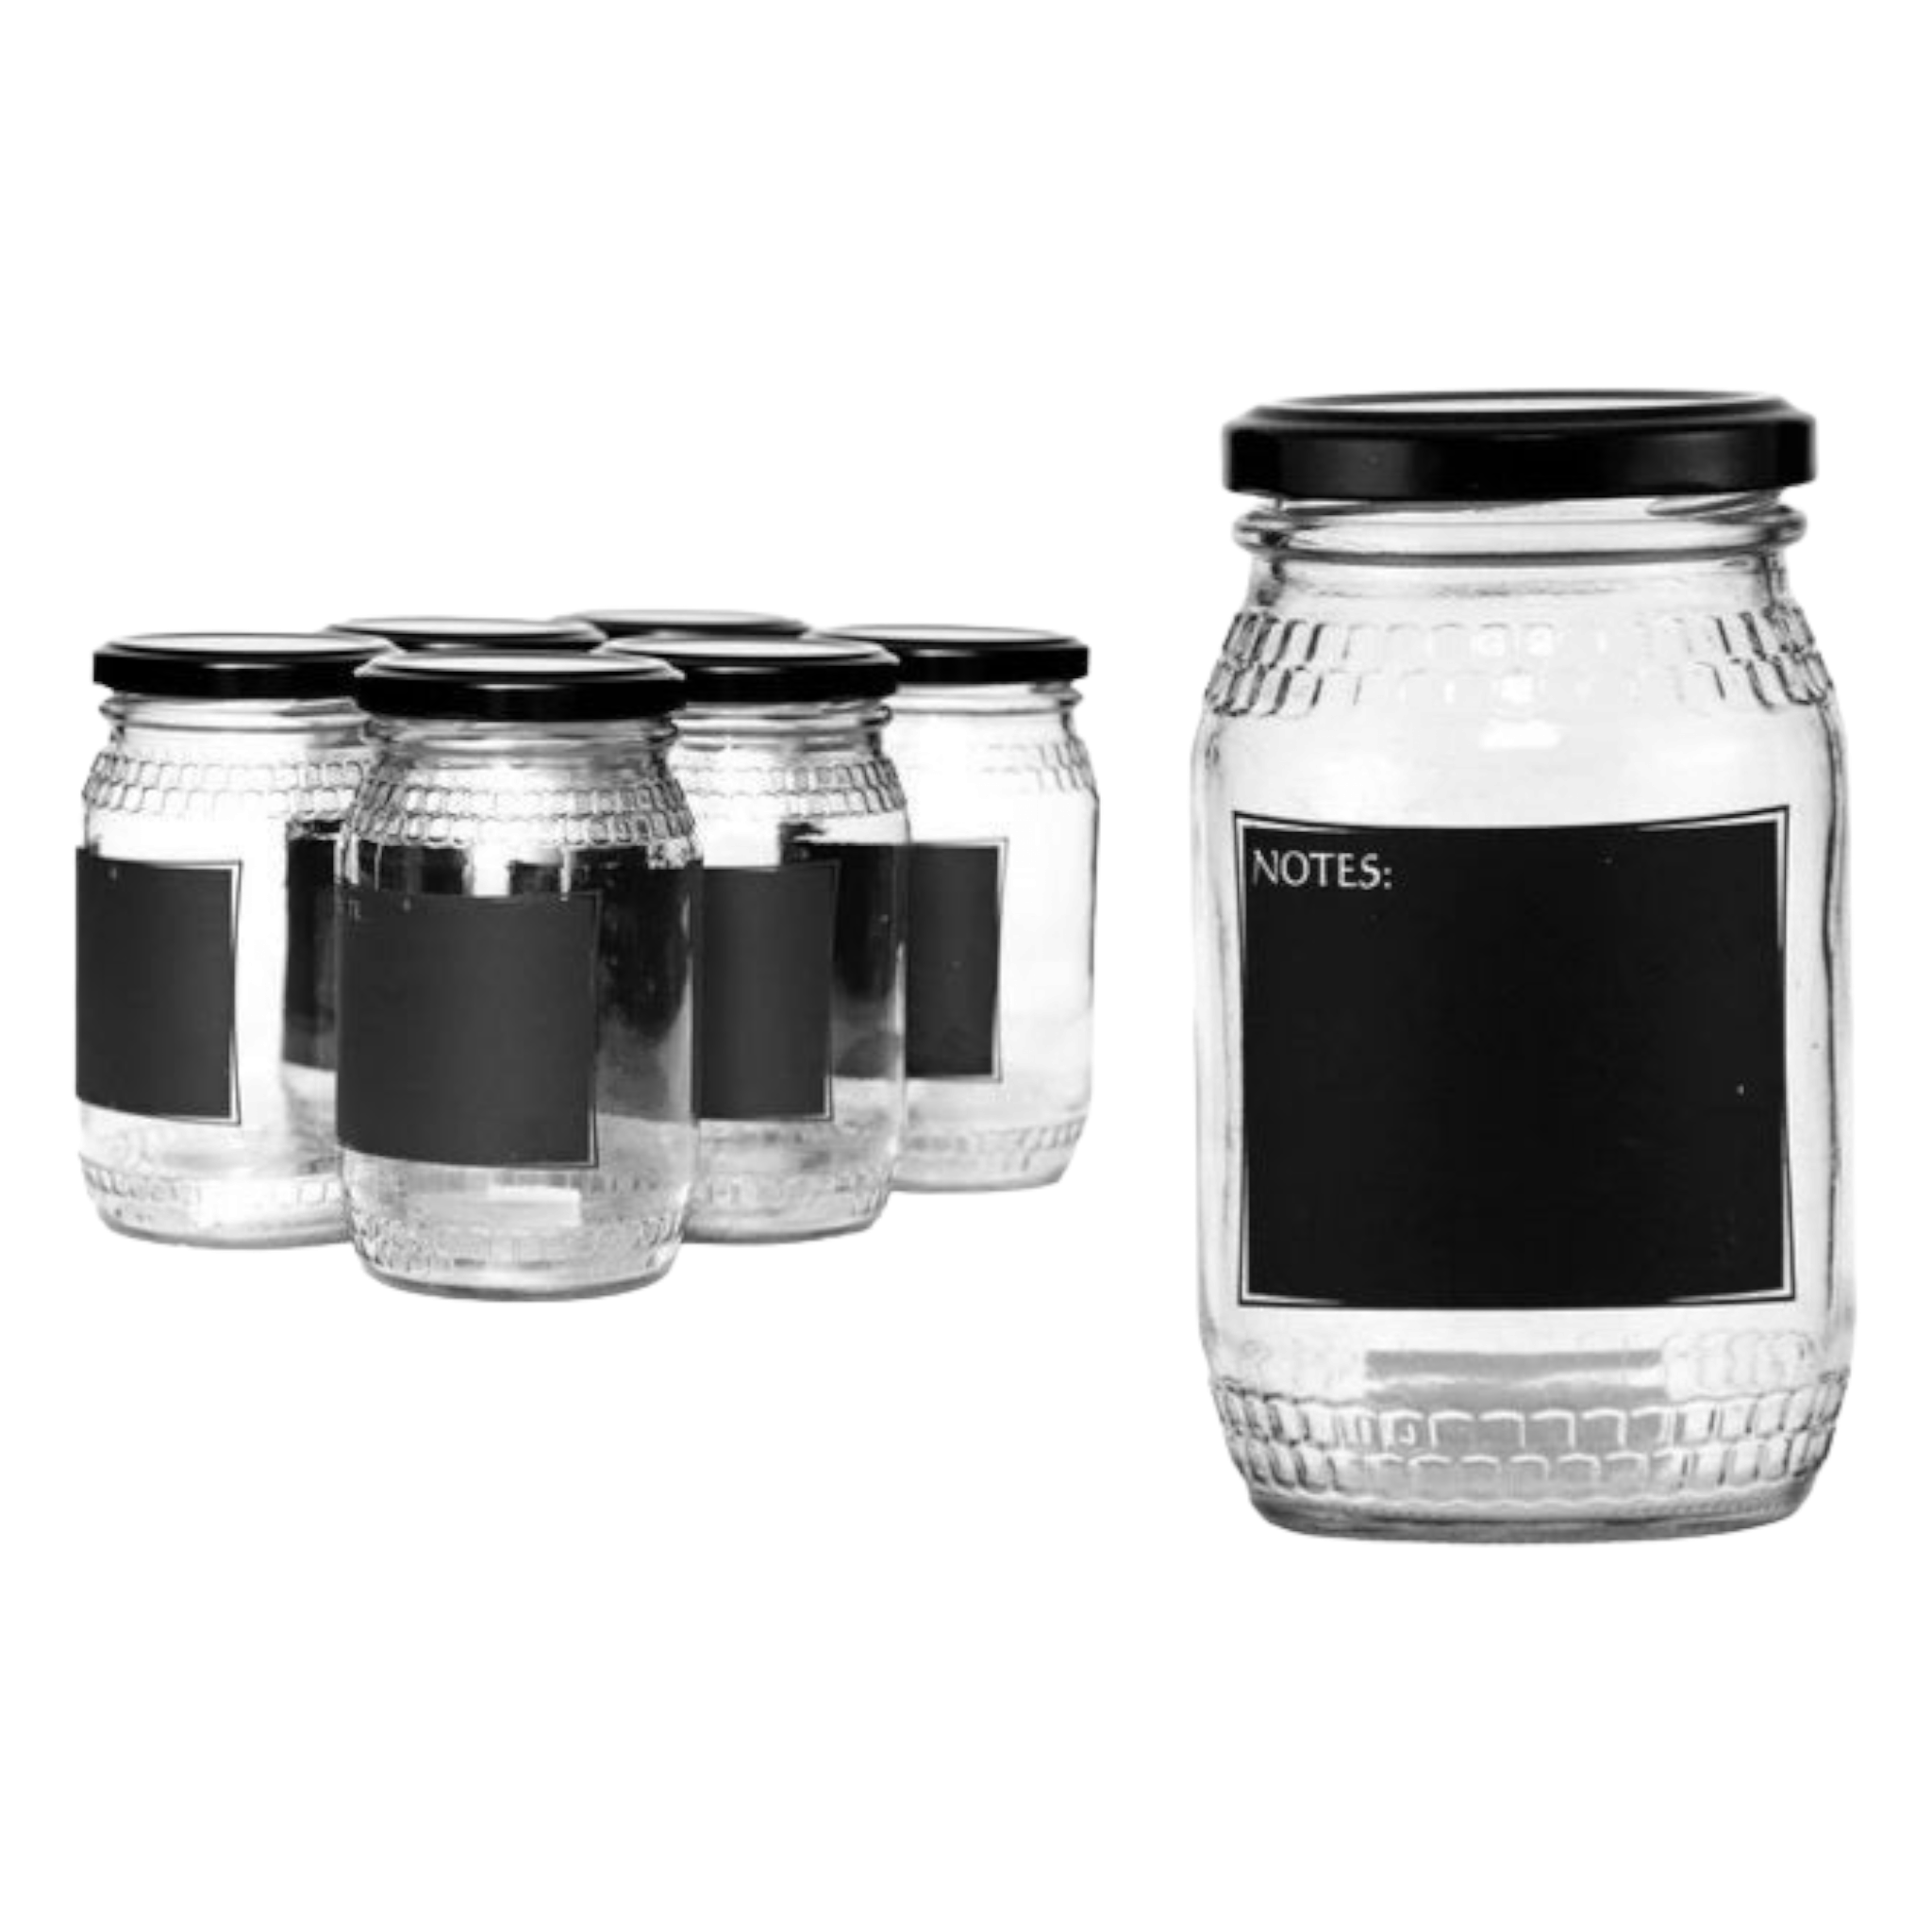 Consol Glass Honey Jar 352ml with Chalkboard Black Notes 27284